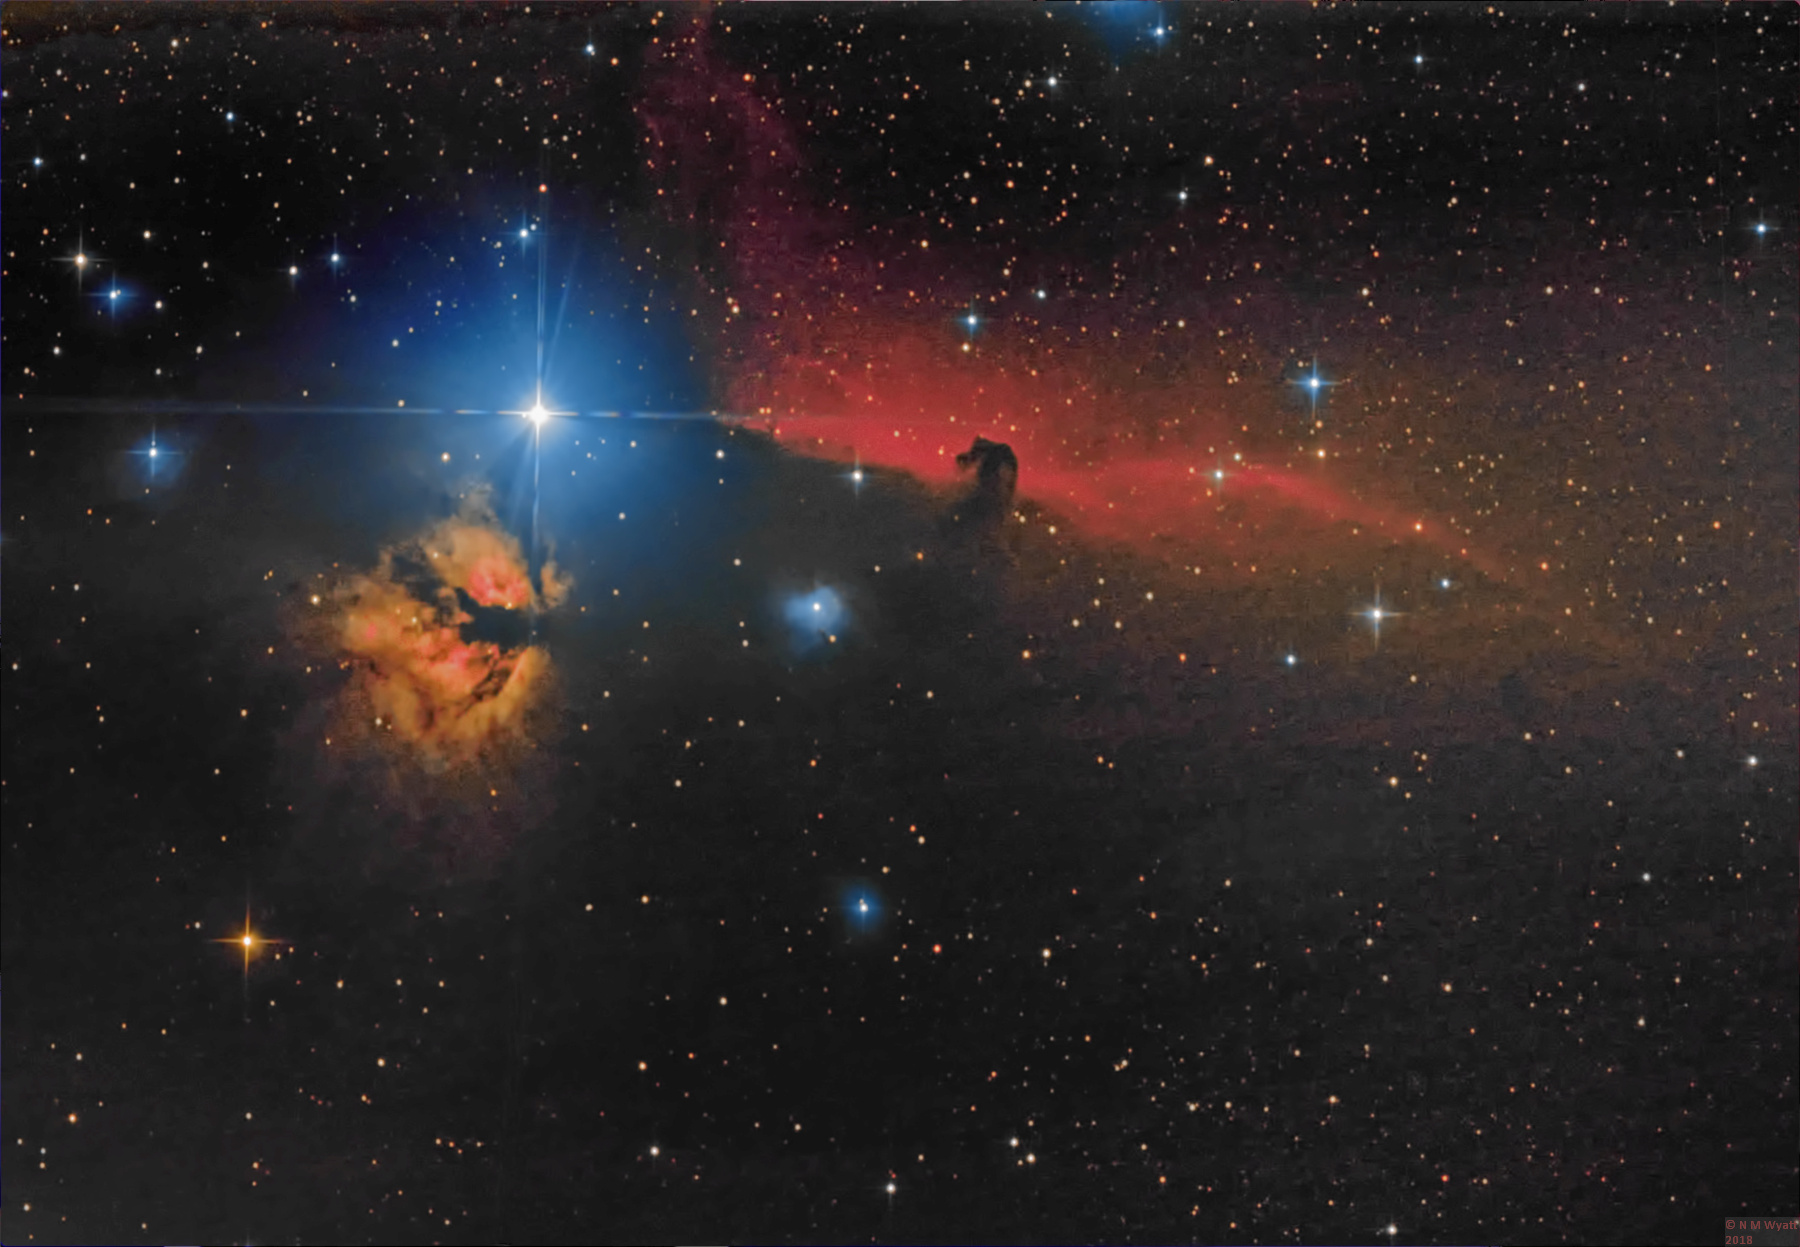 The bFalme and Horsehead Nebulas in Orion